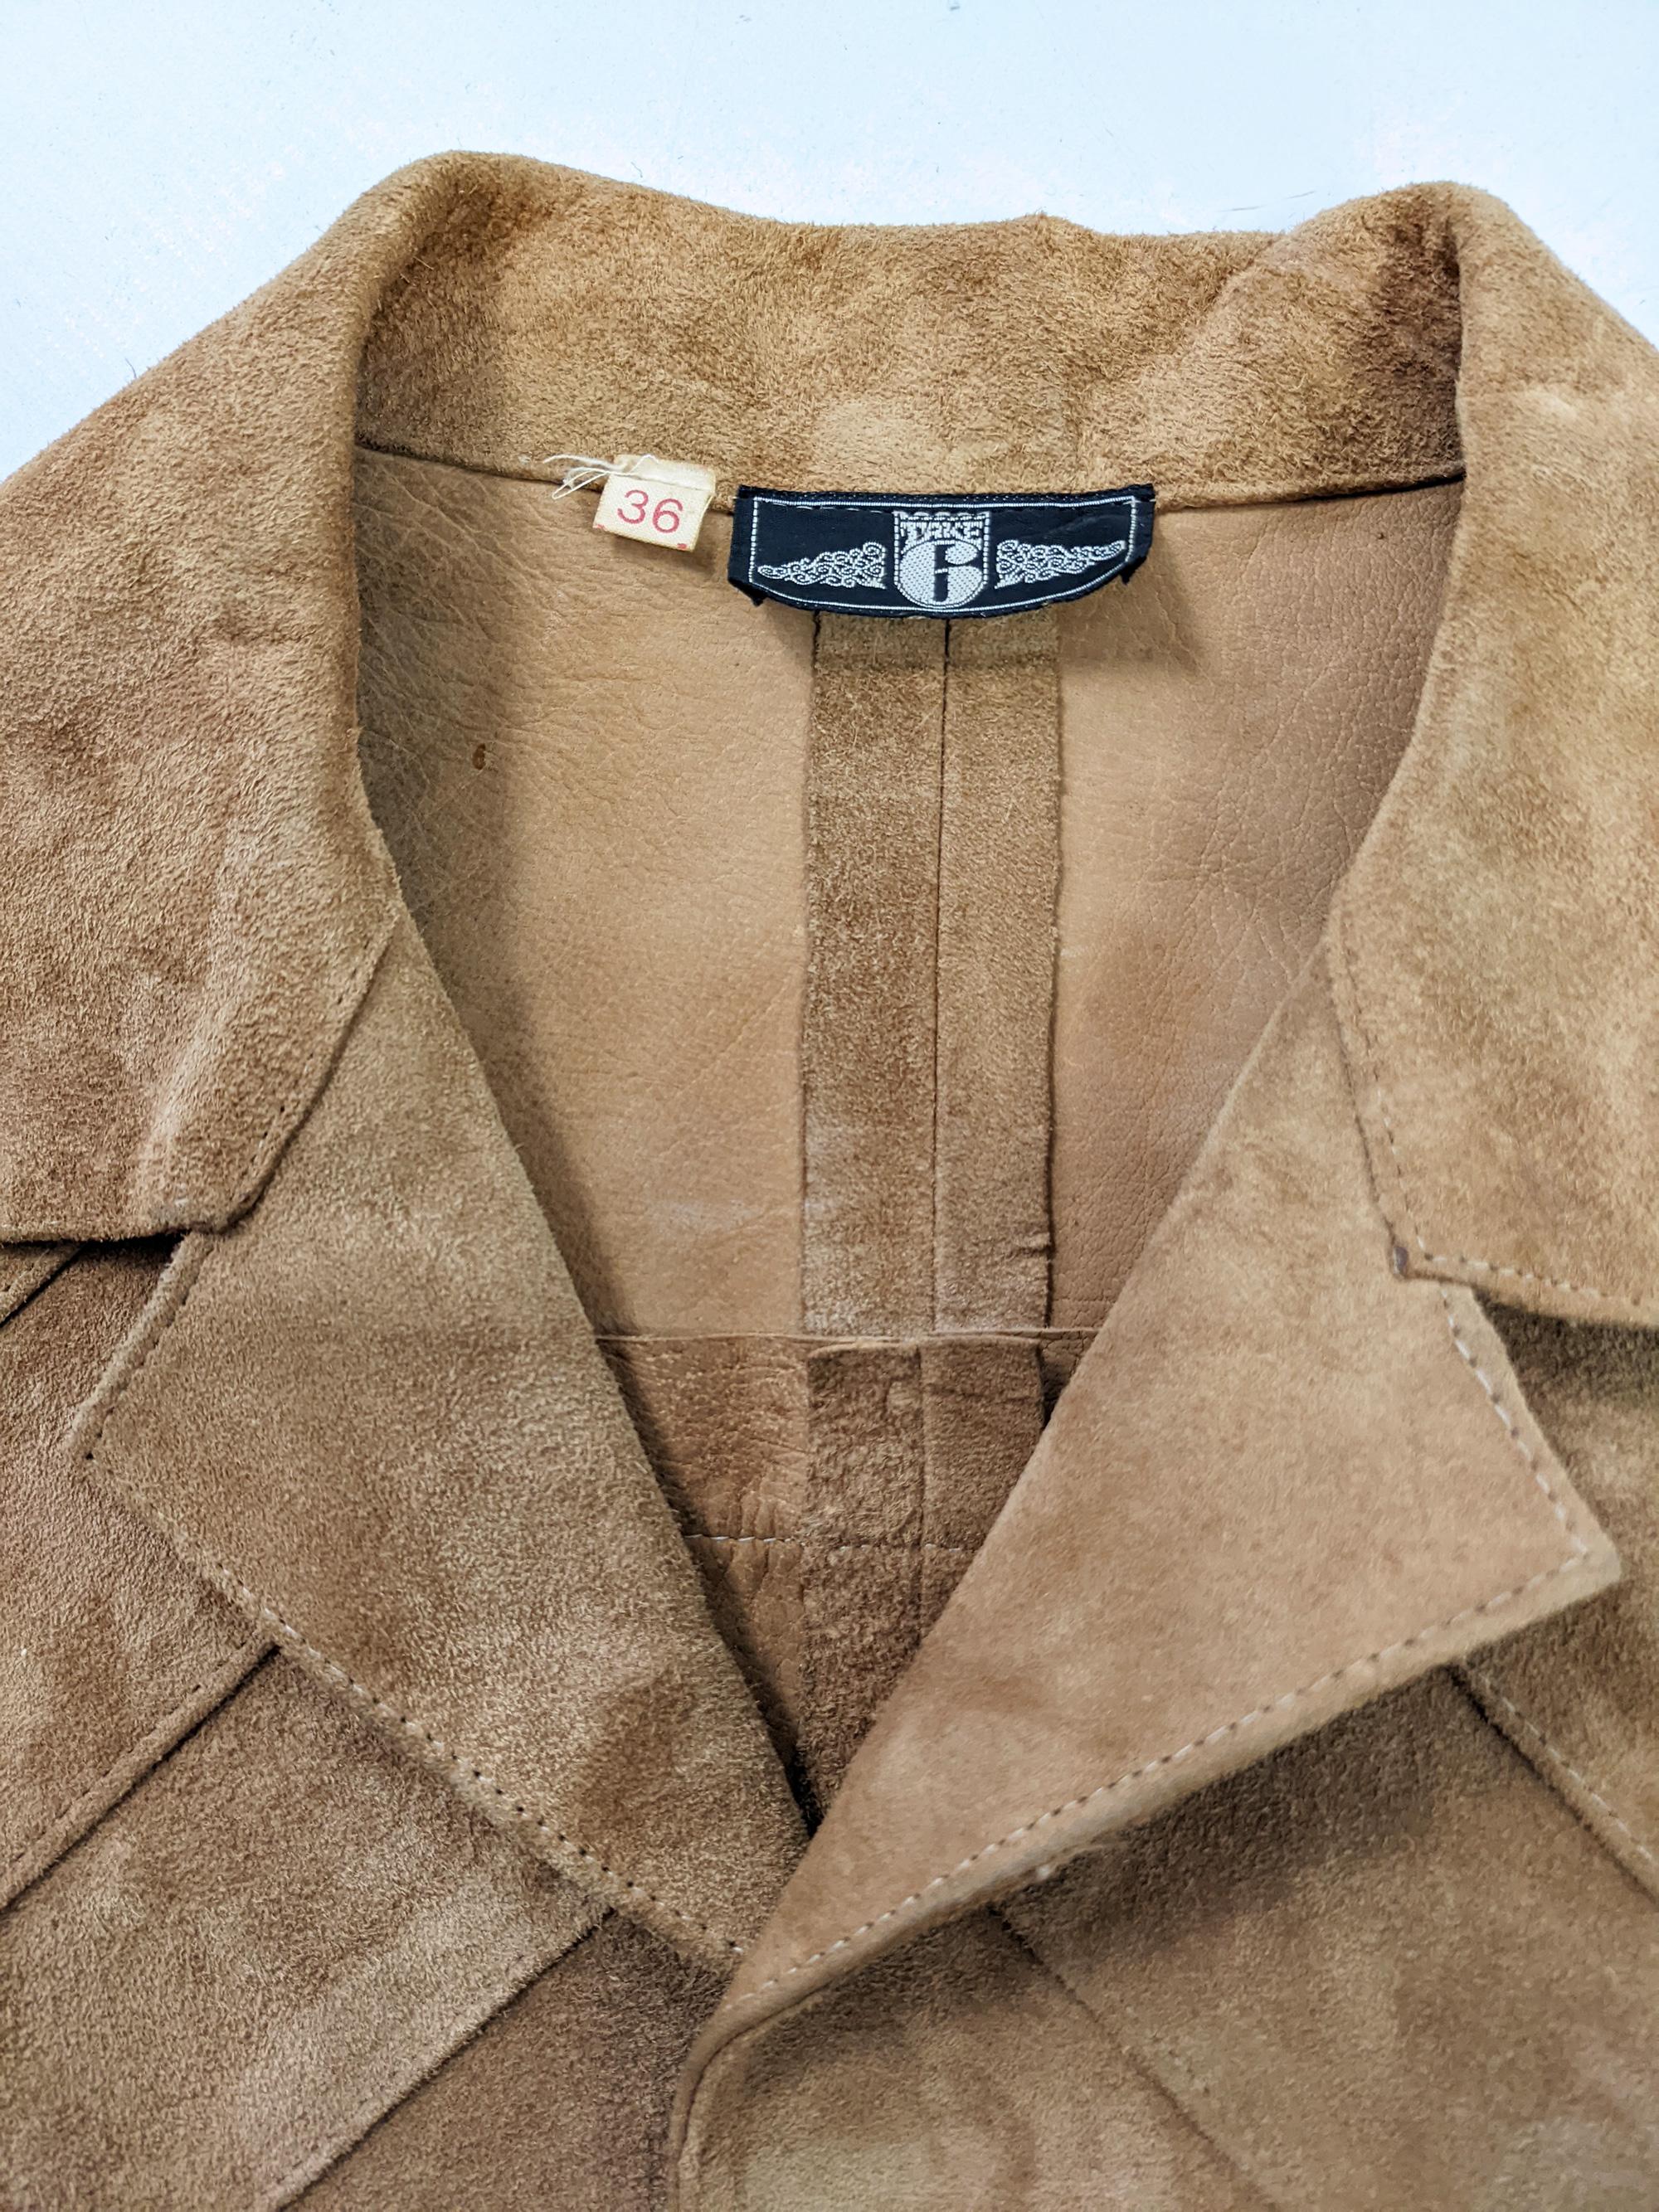 Men's Take 6 of Carnaby Street Vintage Mens 60s Real Suede Tan Jacket, 1960s For Sale